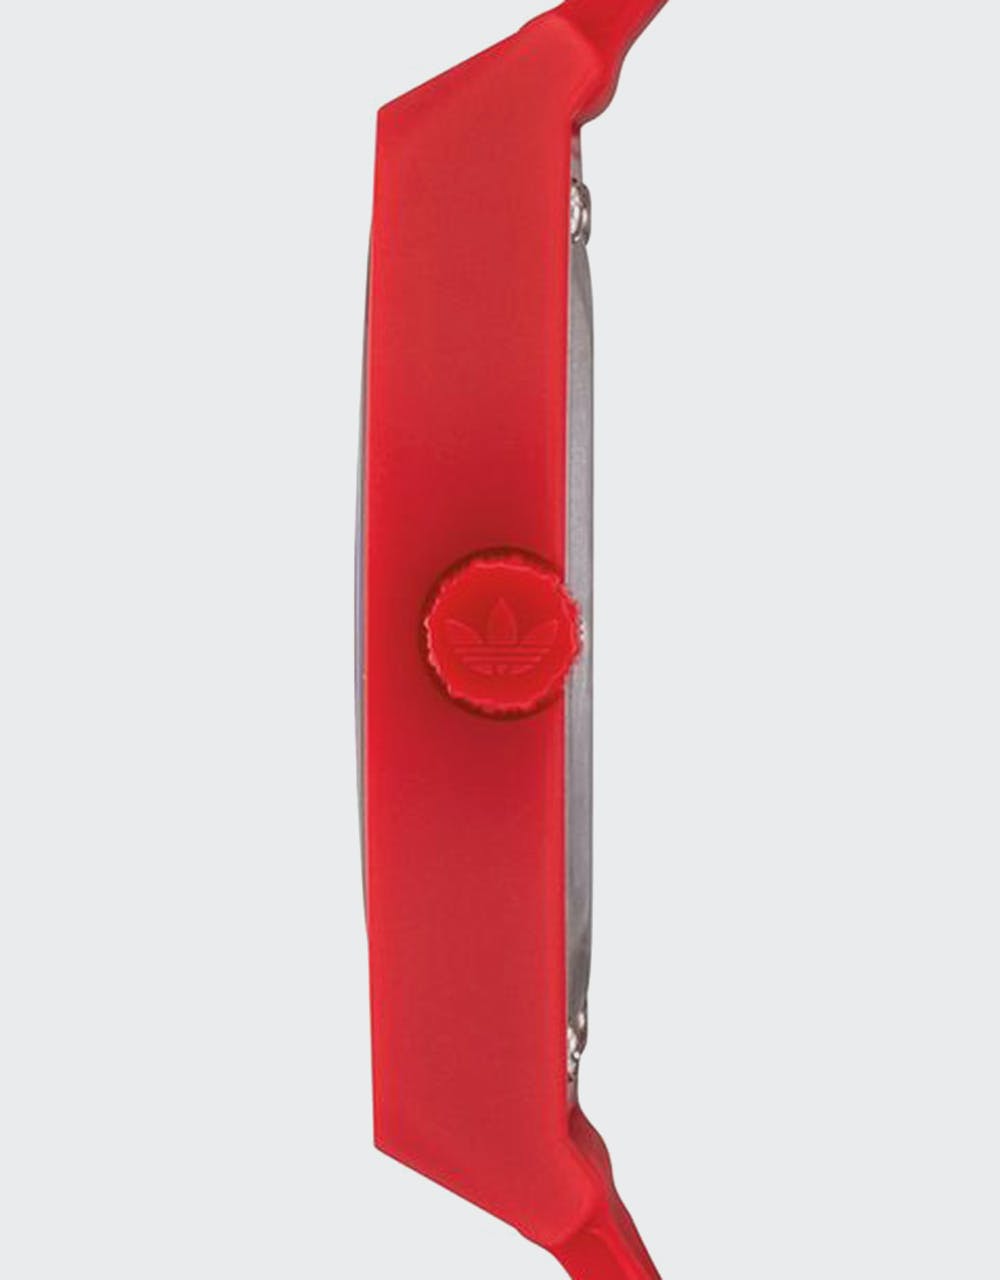 Adidas Process SP1 Watch - All Red